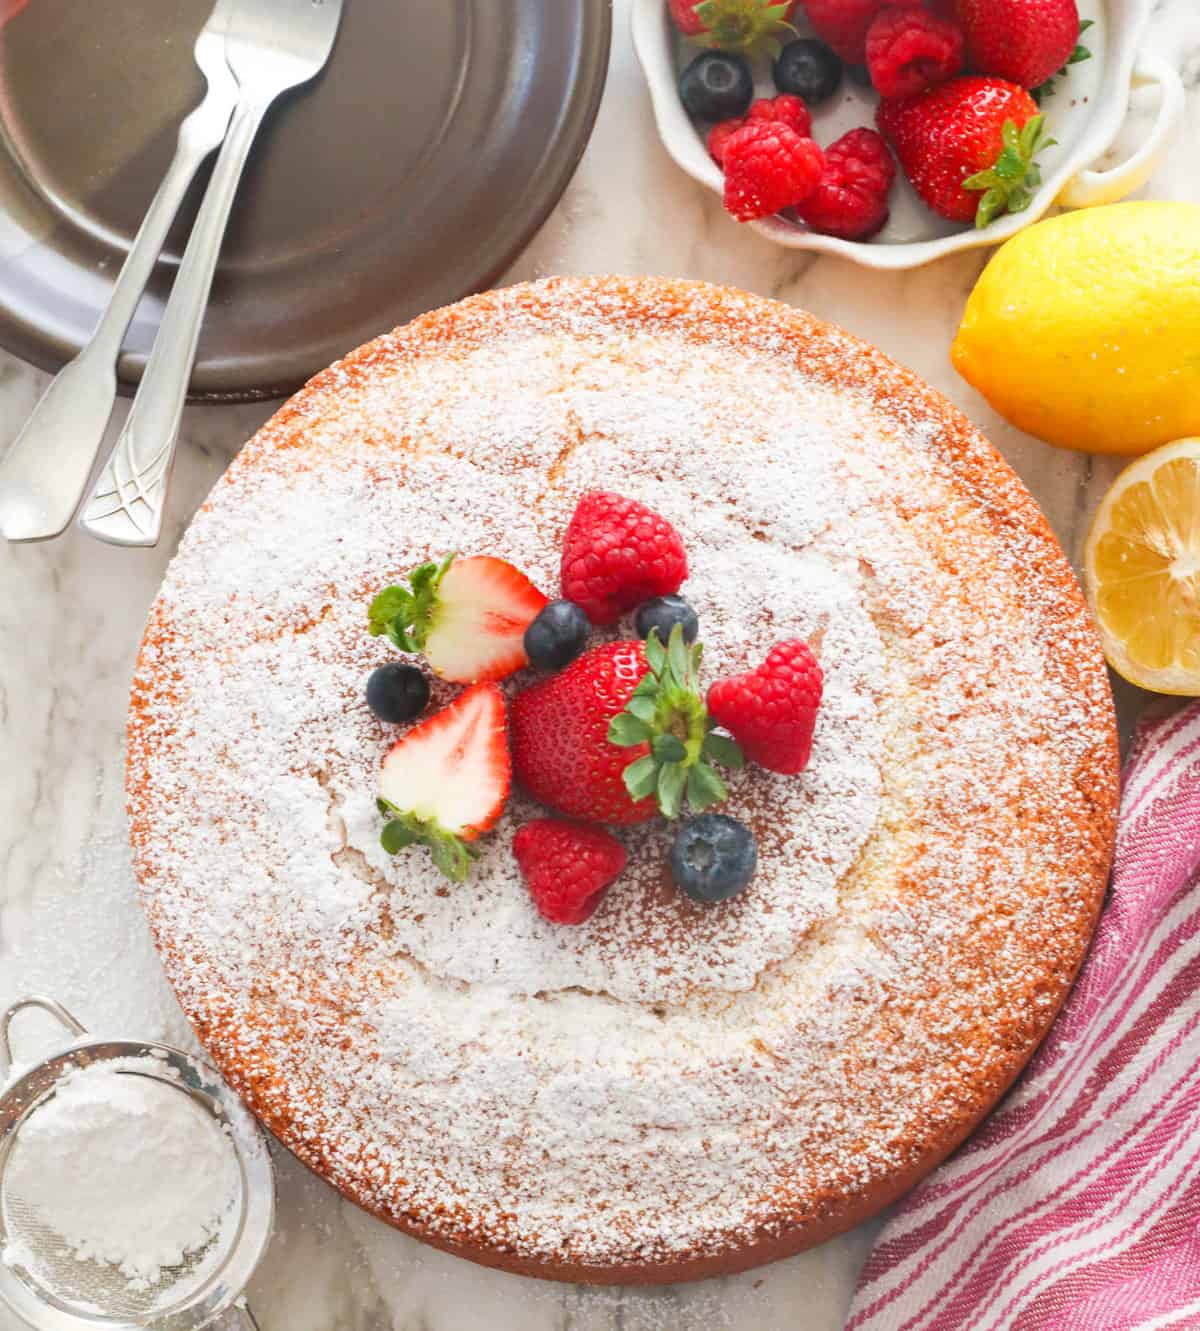 Olive Oil Cake – It's tender, moist, and perfectly sweet